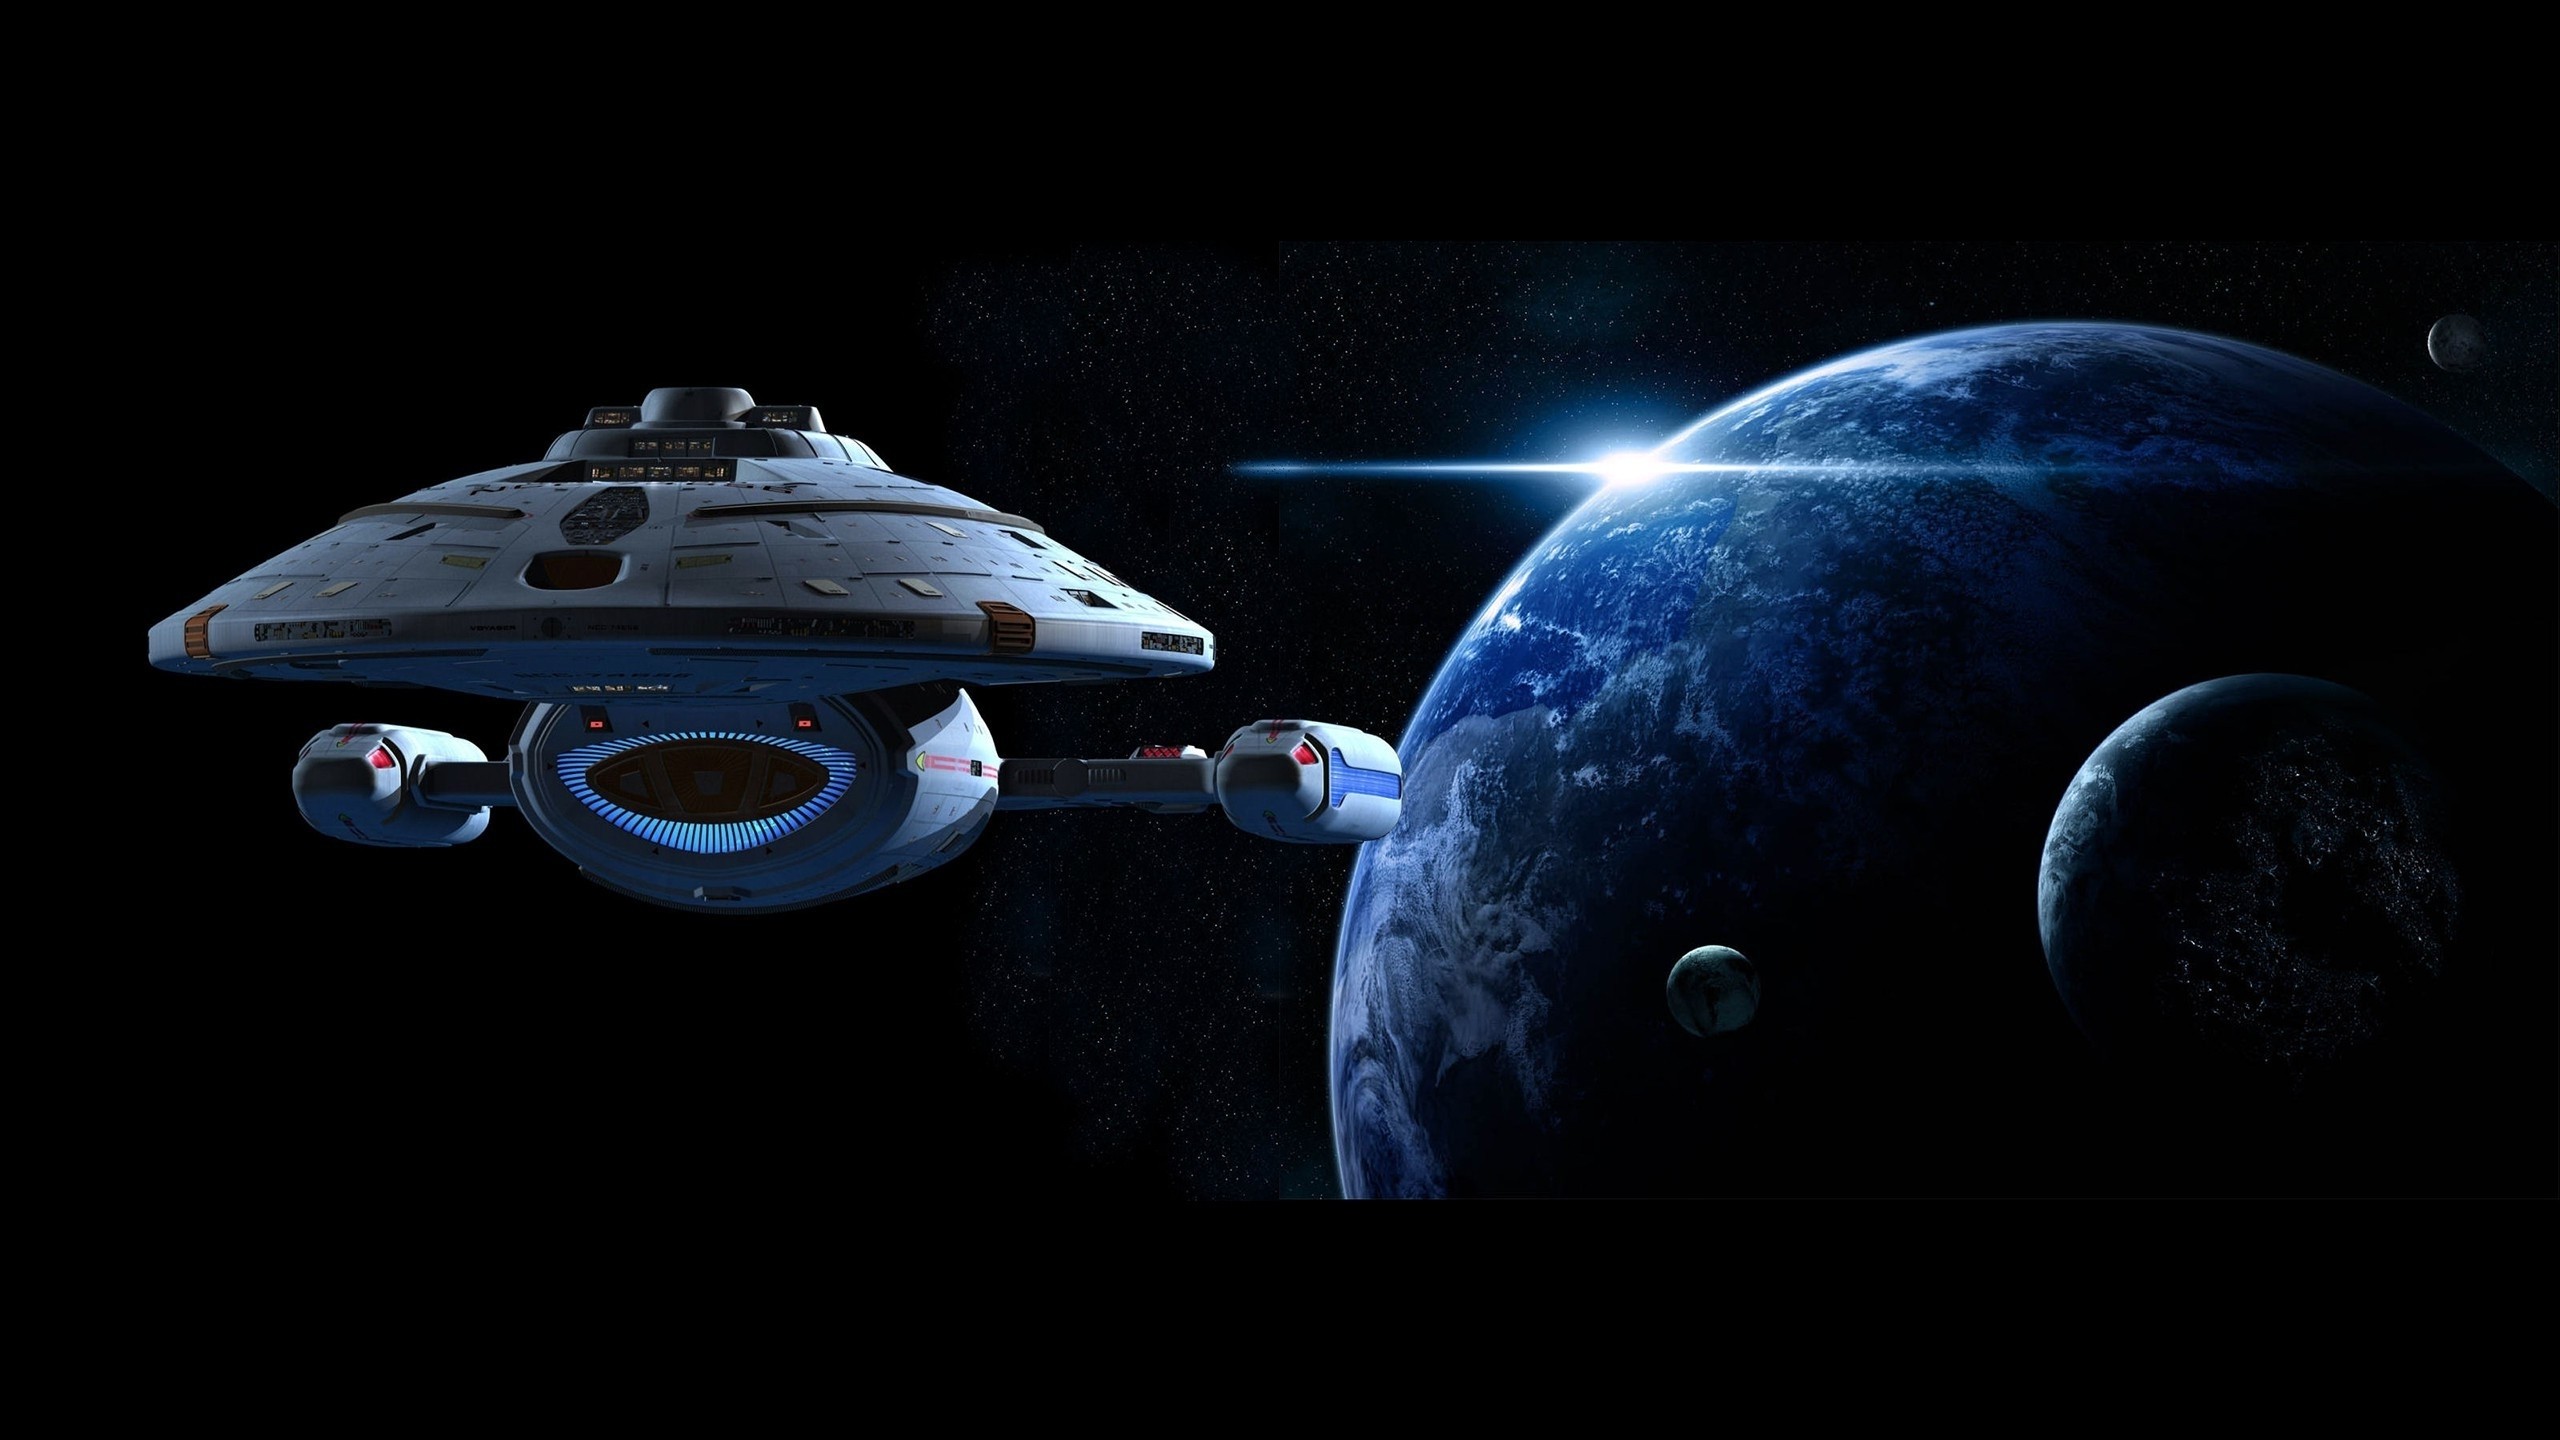 2560x1440 10 Best And Most Current Star Trek Voyager Wallpaper for Desktop Computer  with FULL HD 1080p (1920 Ã 1080) FREE DOWNLOAD